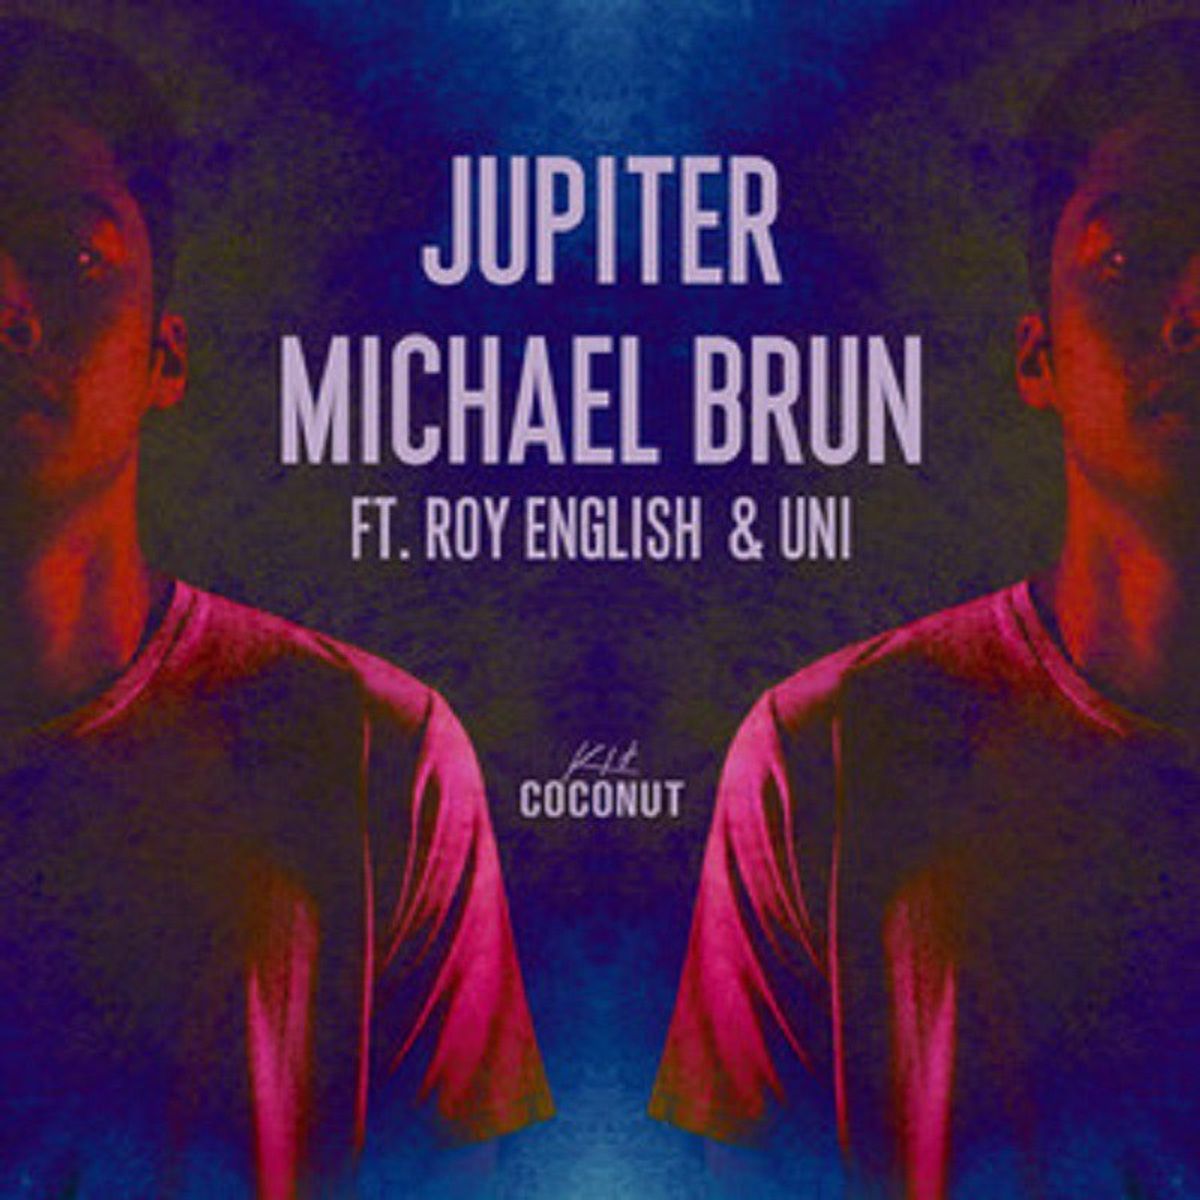 "Jupiter" From Michael Brun And What He Has Been Up To